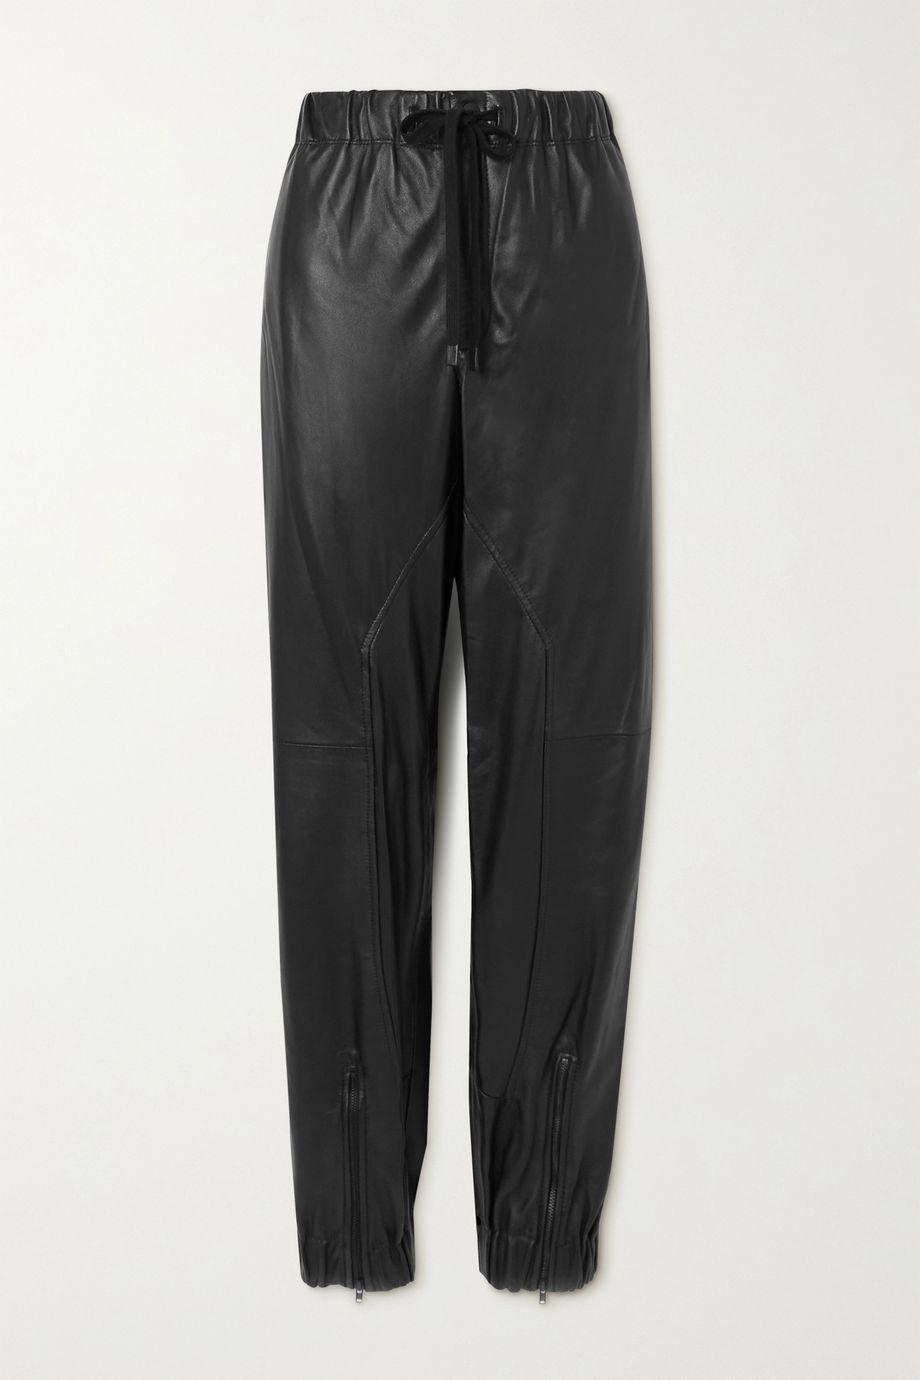 + NET SUSTAIN leather track pants by BASSIKE